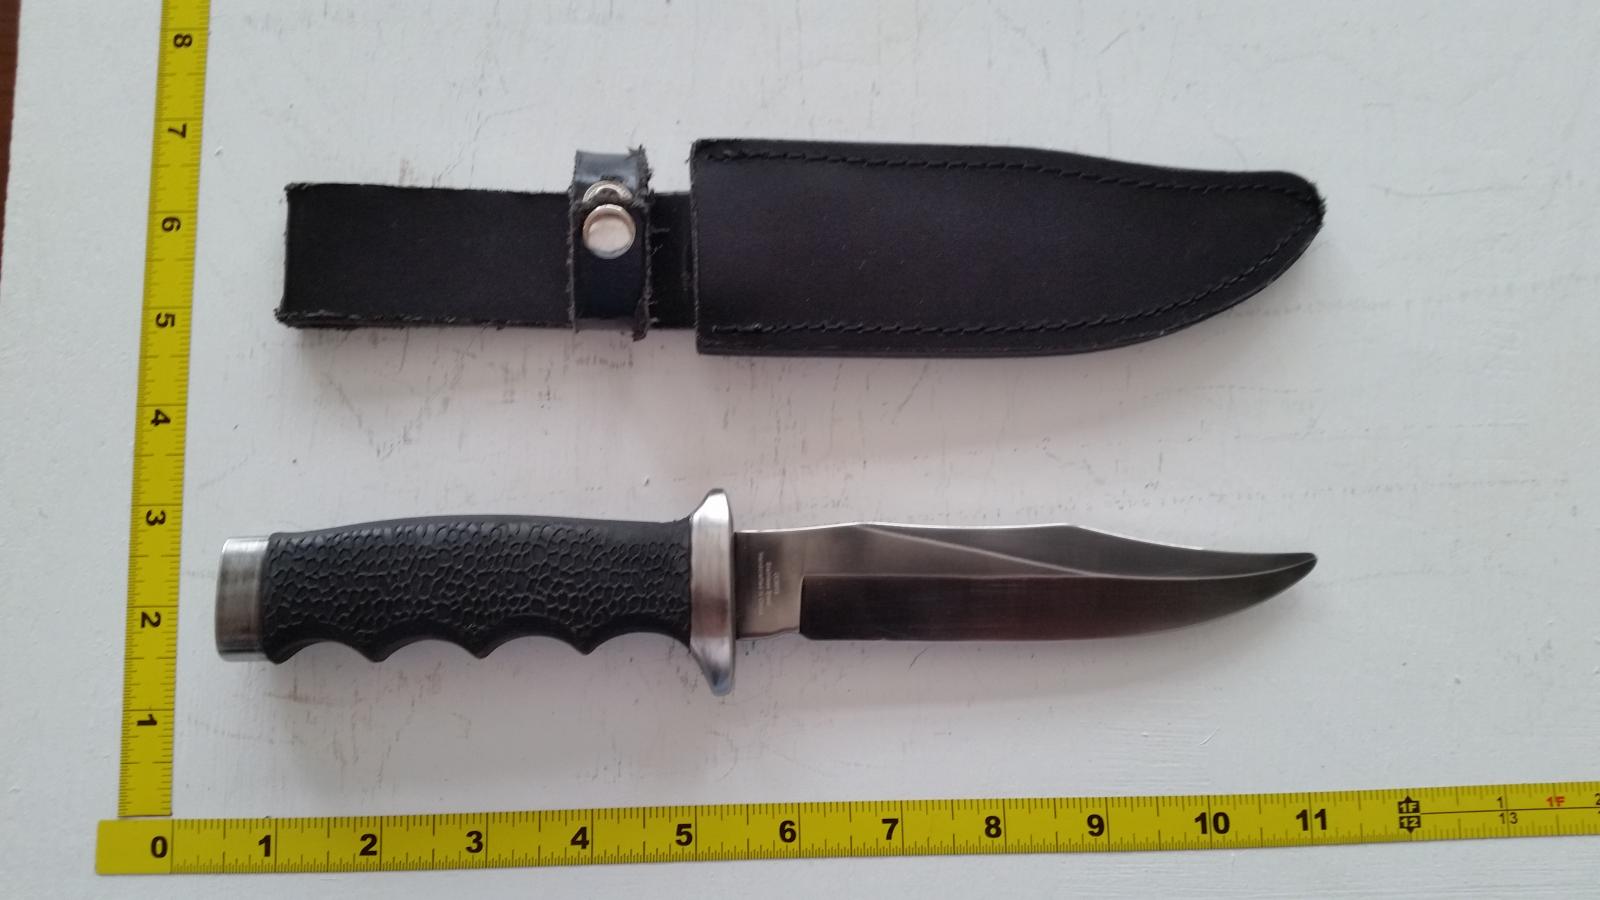 Realistic Steel Hunting Knife, Medium Weight, With Sheath - Approved for blade-to-blade stage combat.